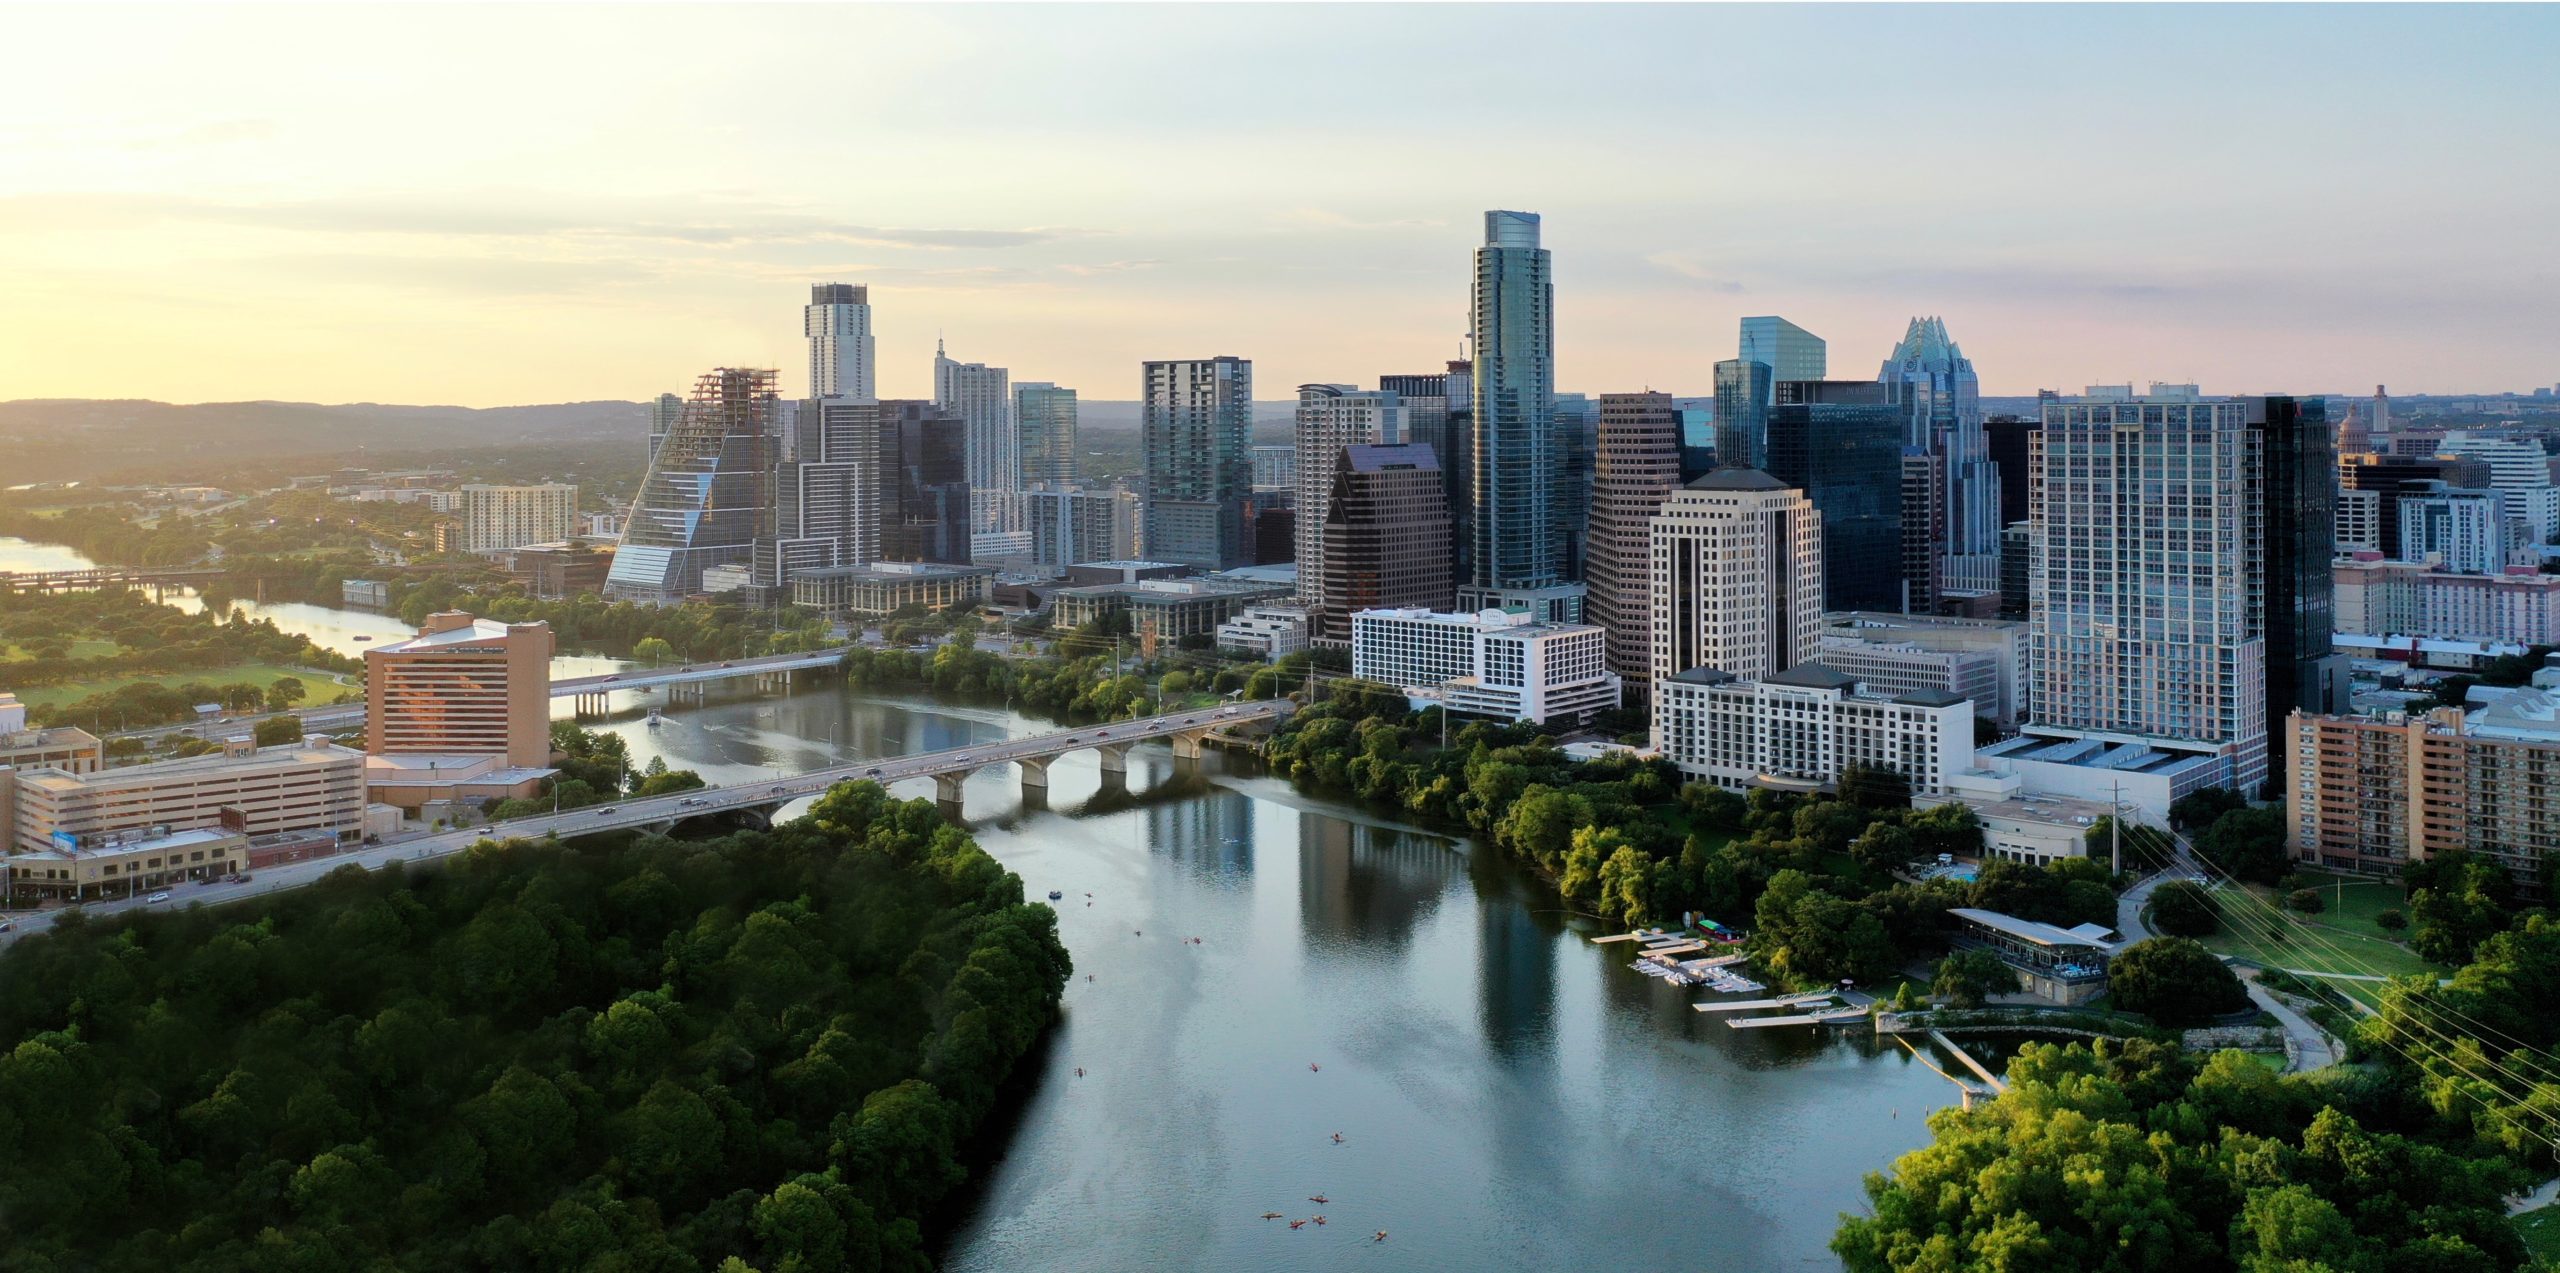 Model Community: a view of the austin skyline